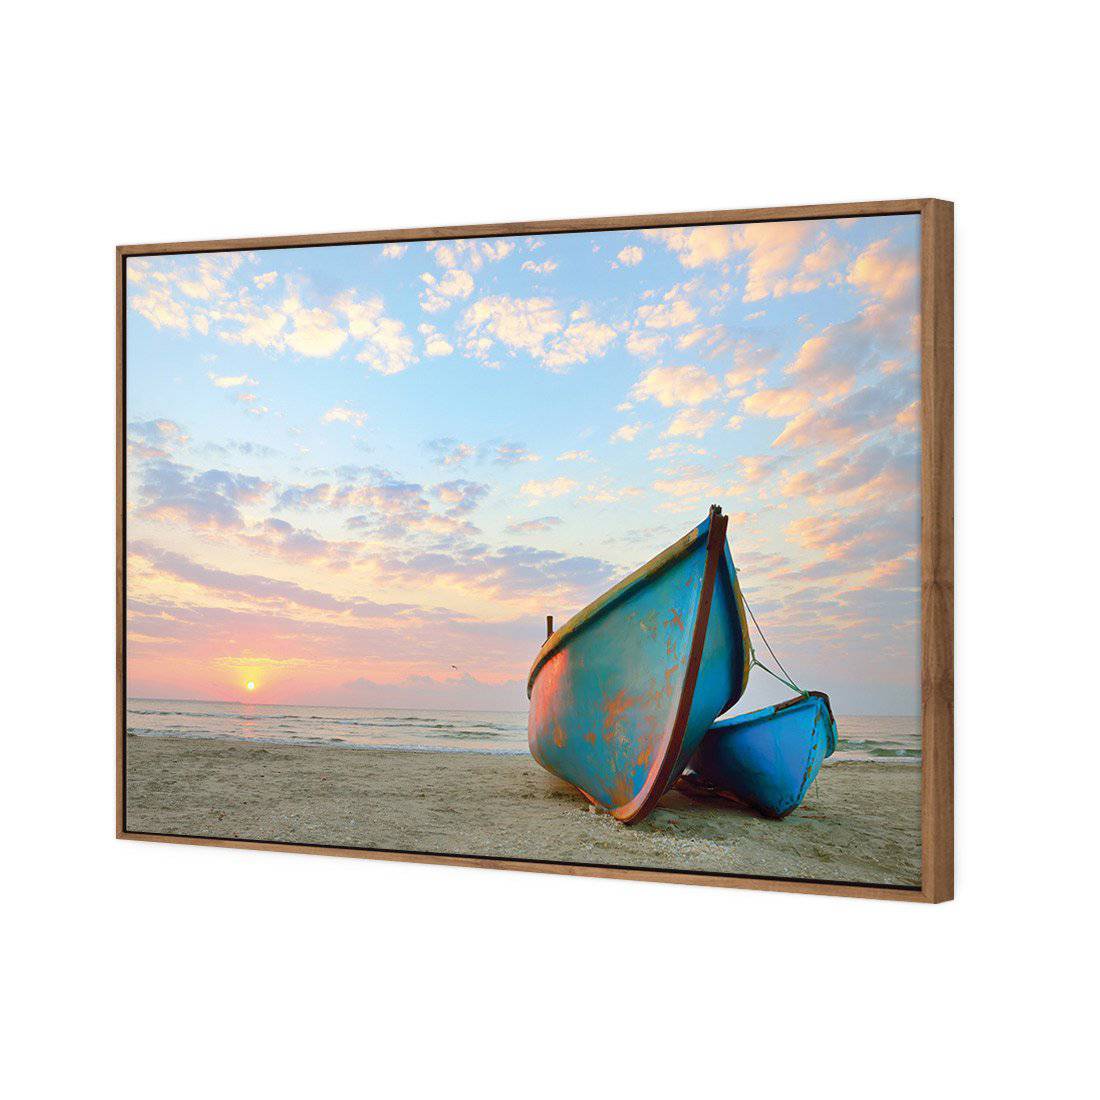 Washed Up Canvas Art-Canvas-Wall Art Designs-45x30cm-Canvas - Natural Frame-Wall Art Designs